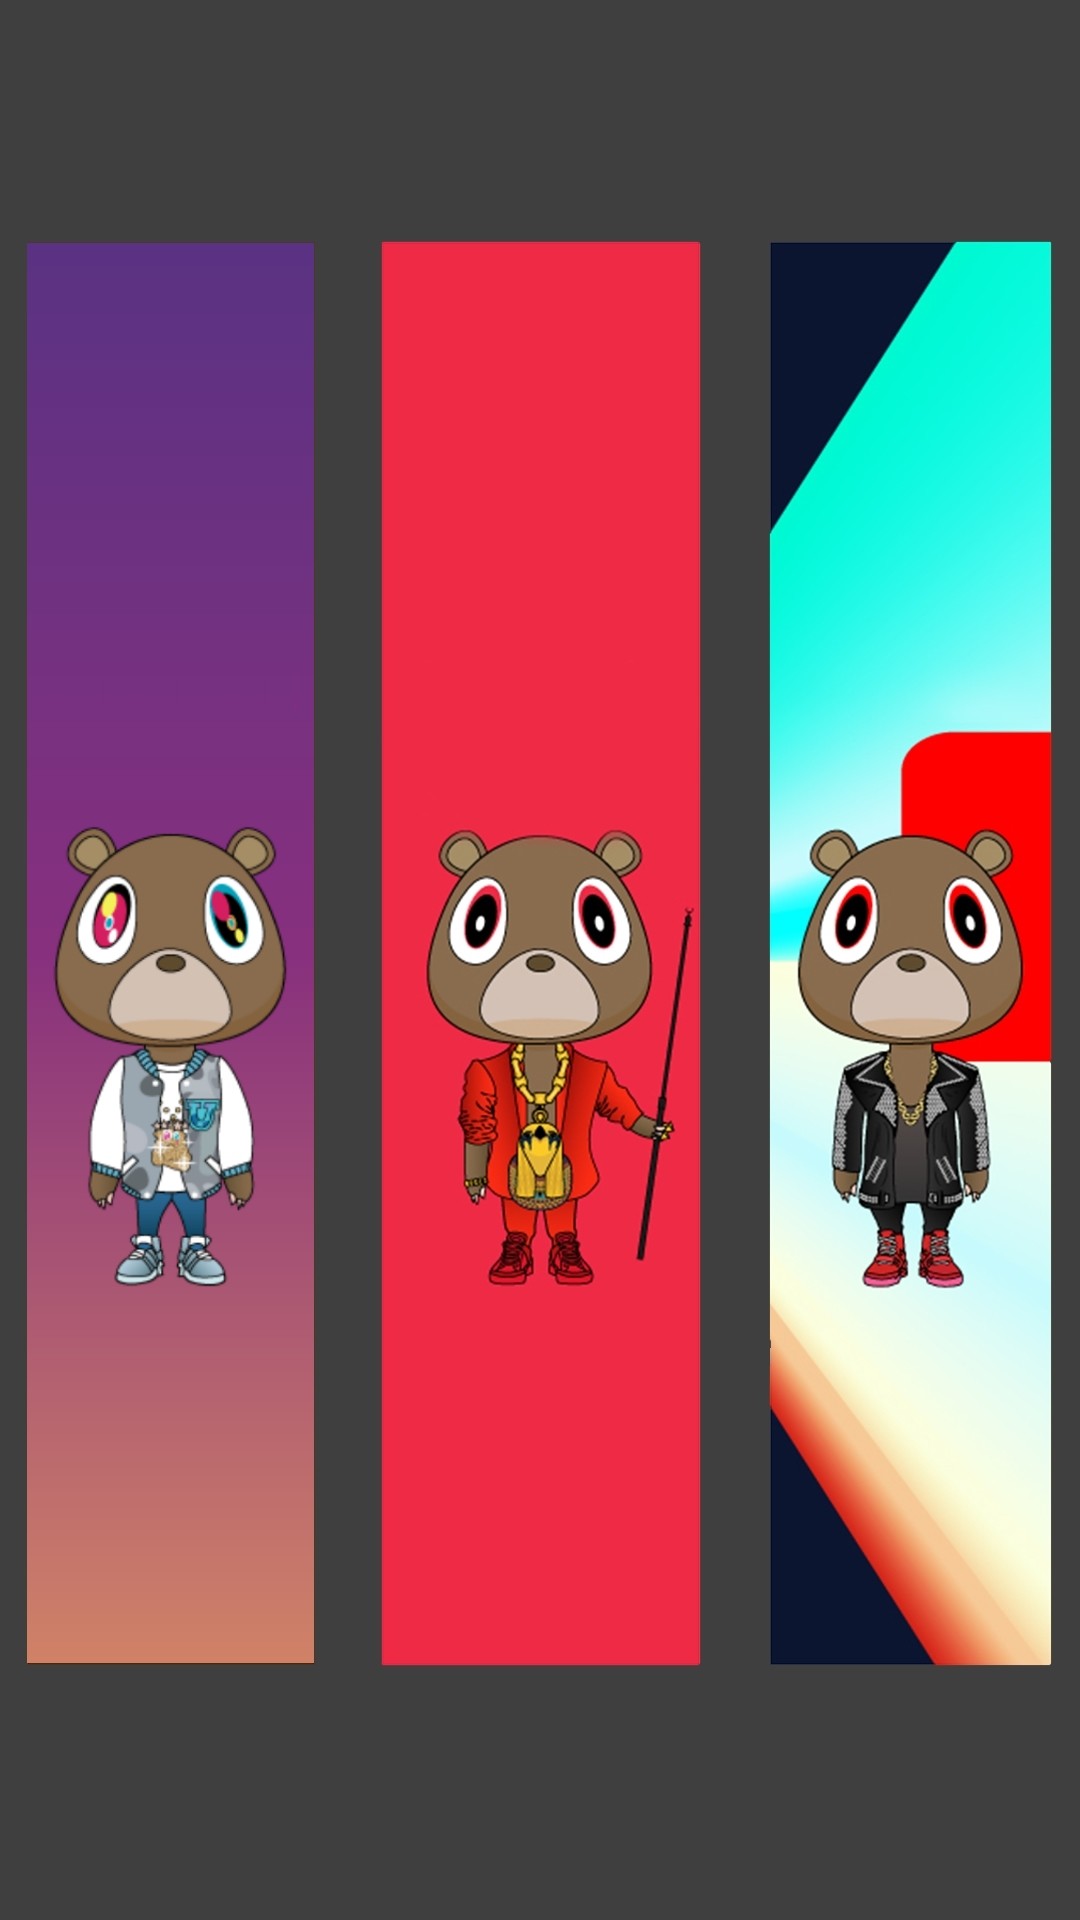 Modified I Picture I Saw On Here Into A Phone Wallpaper - Kanye West Graduation Wallpaper Iphone - HD Wallpaper 